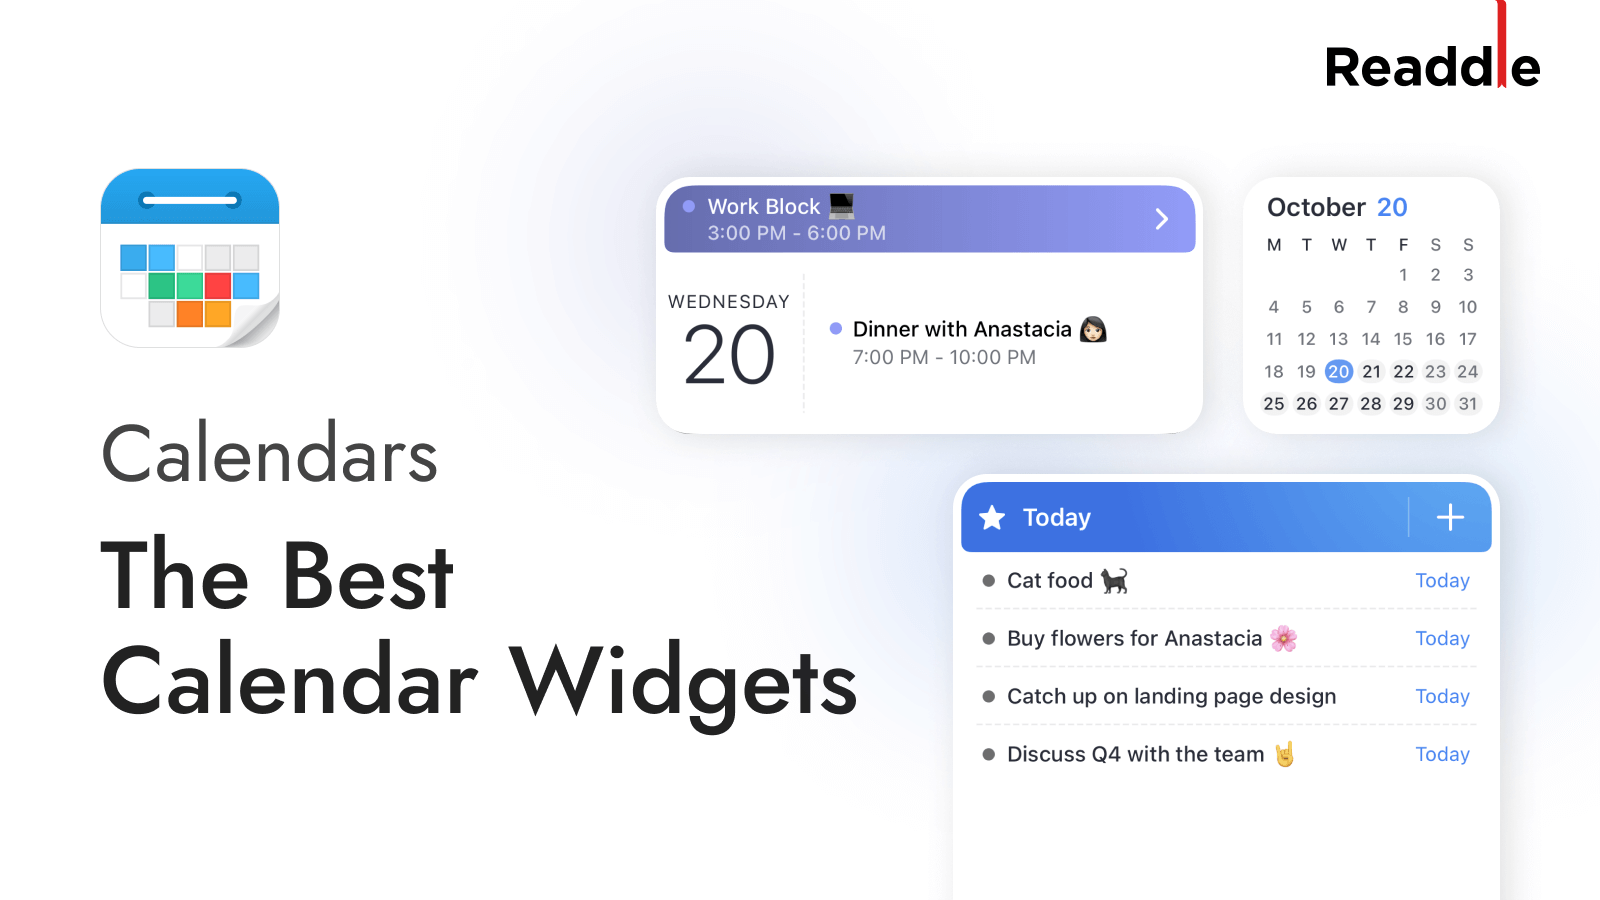 Here Some of The Best Calendar Widgets for